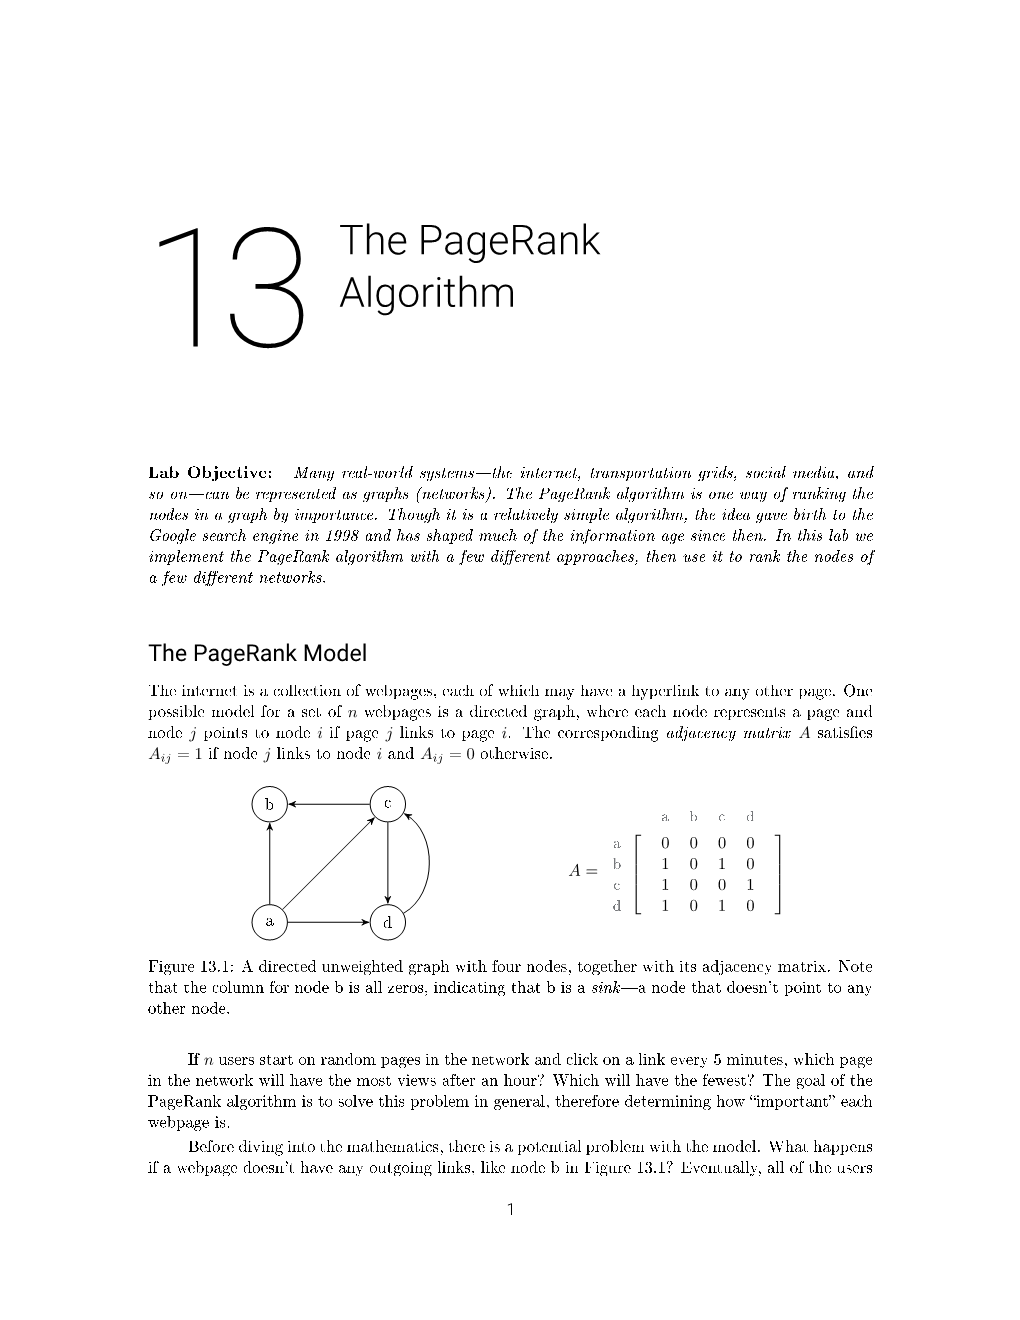 The Pagerank Algorithm Is One Way of Ranking the Nodes in a Graph by Importance